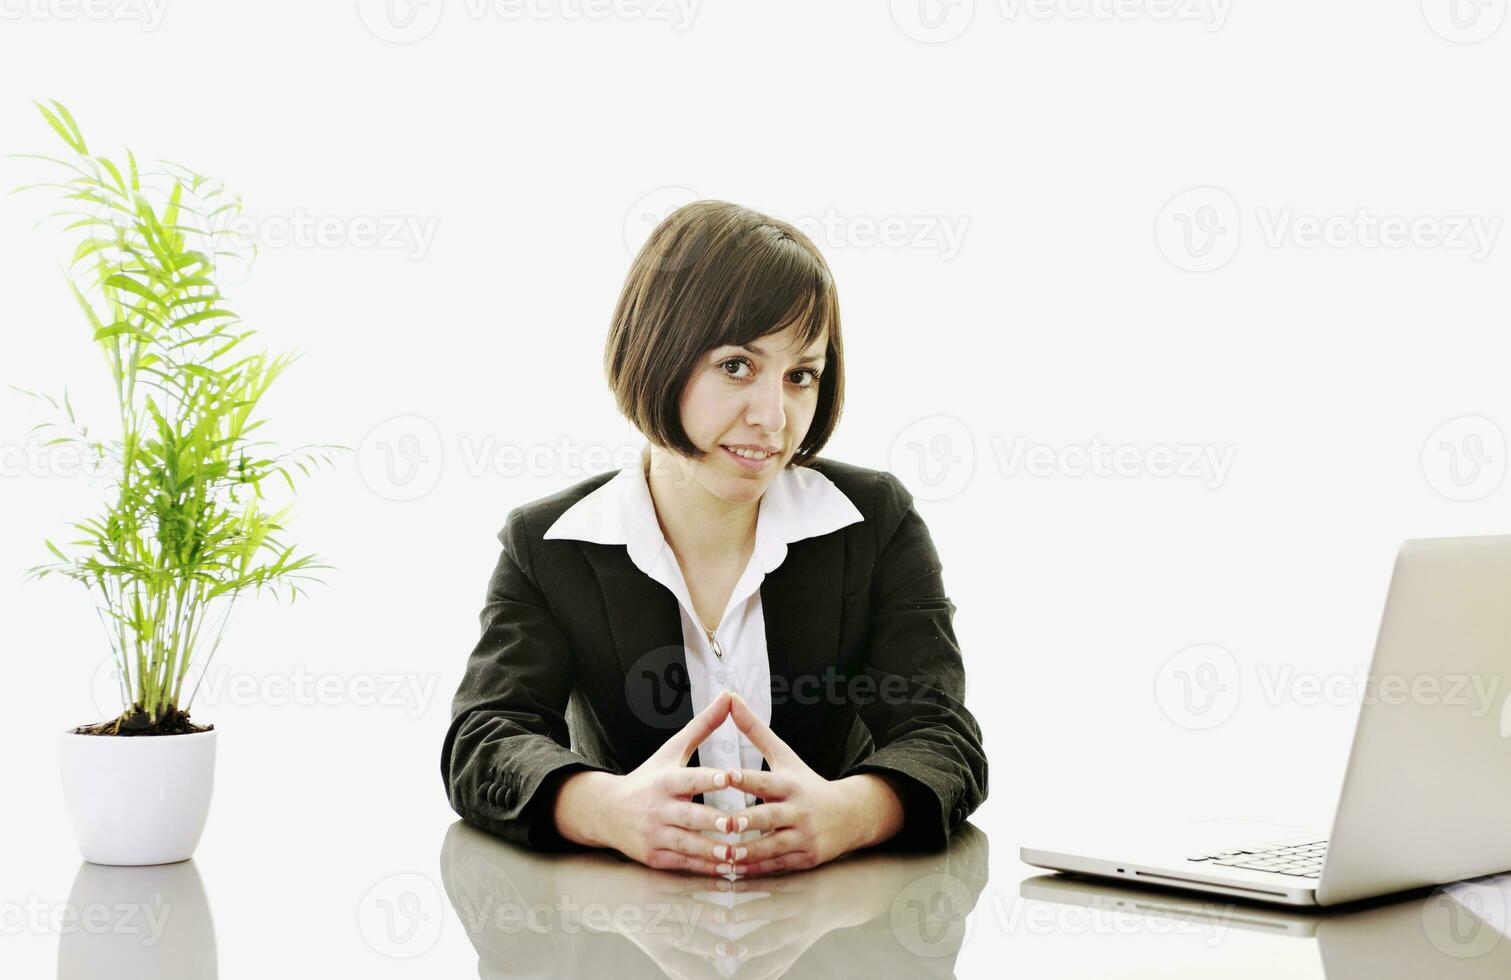 business woman working on laptop photo